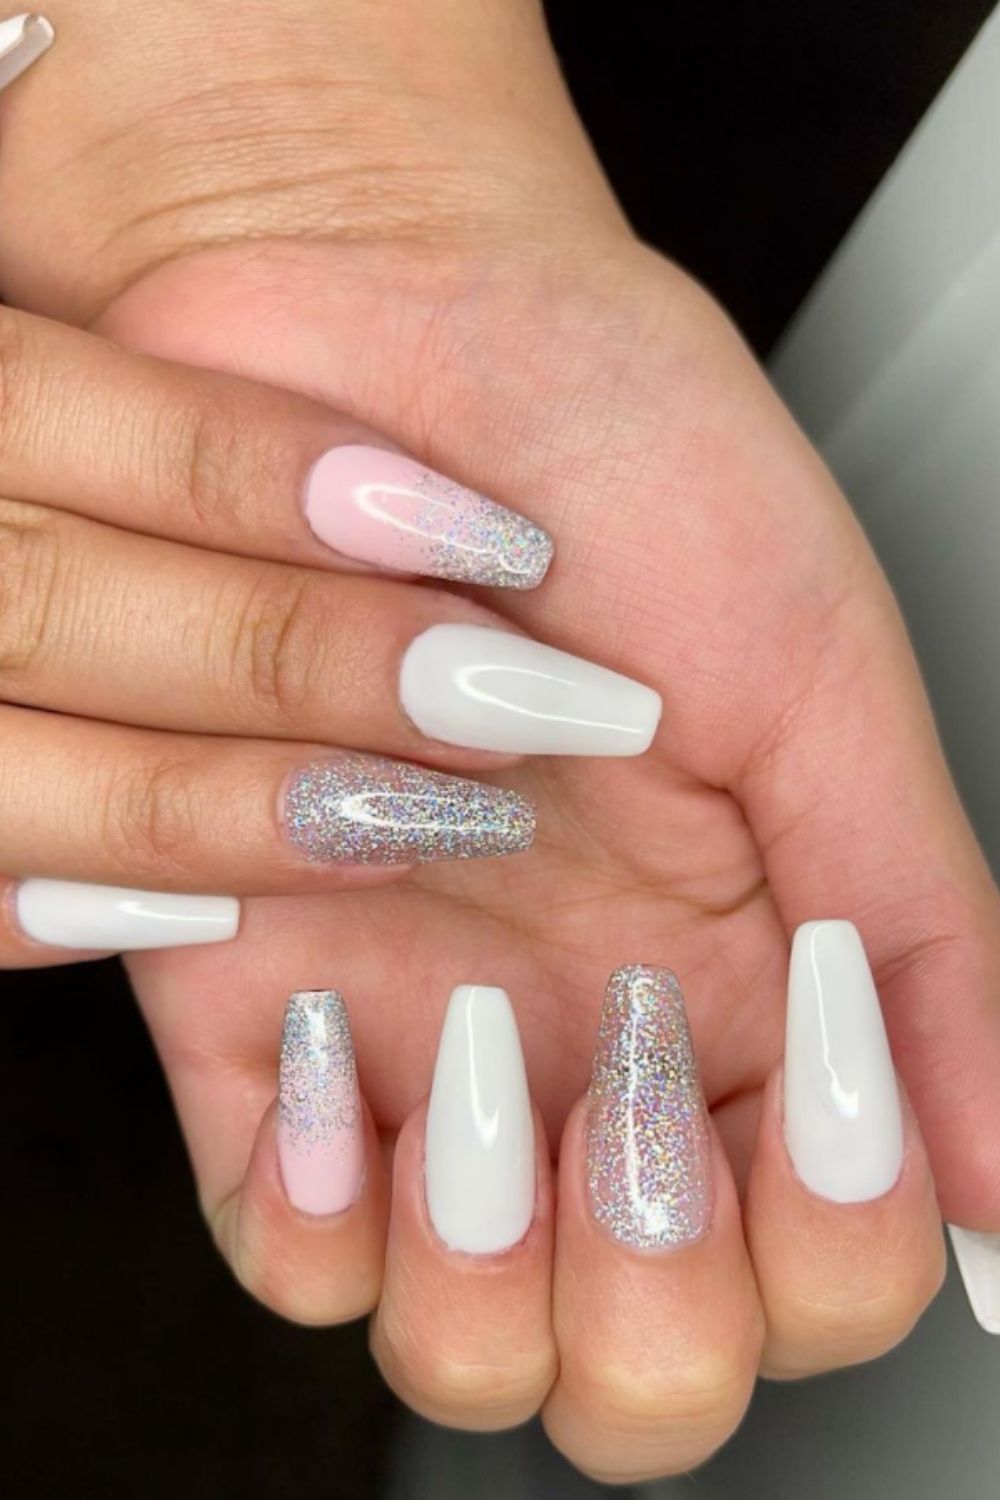 Pretty pink and shiny white nails